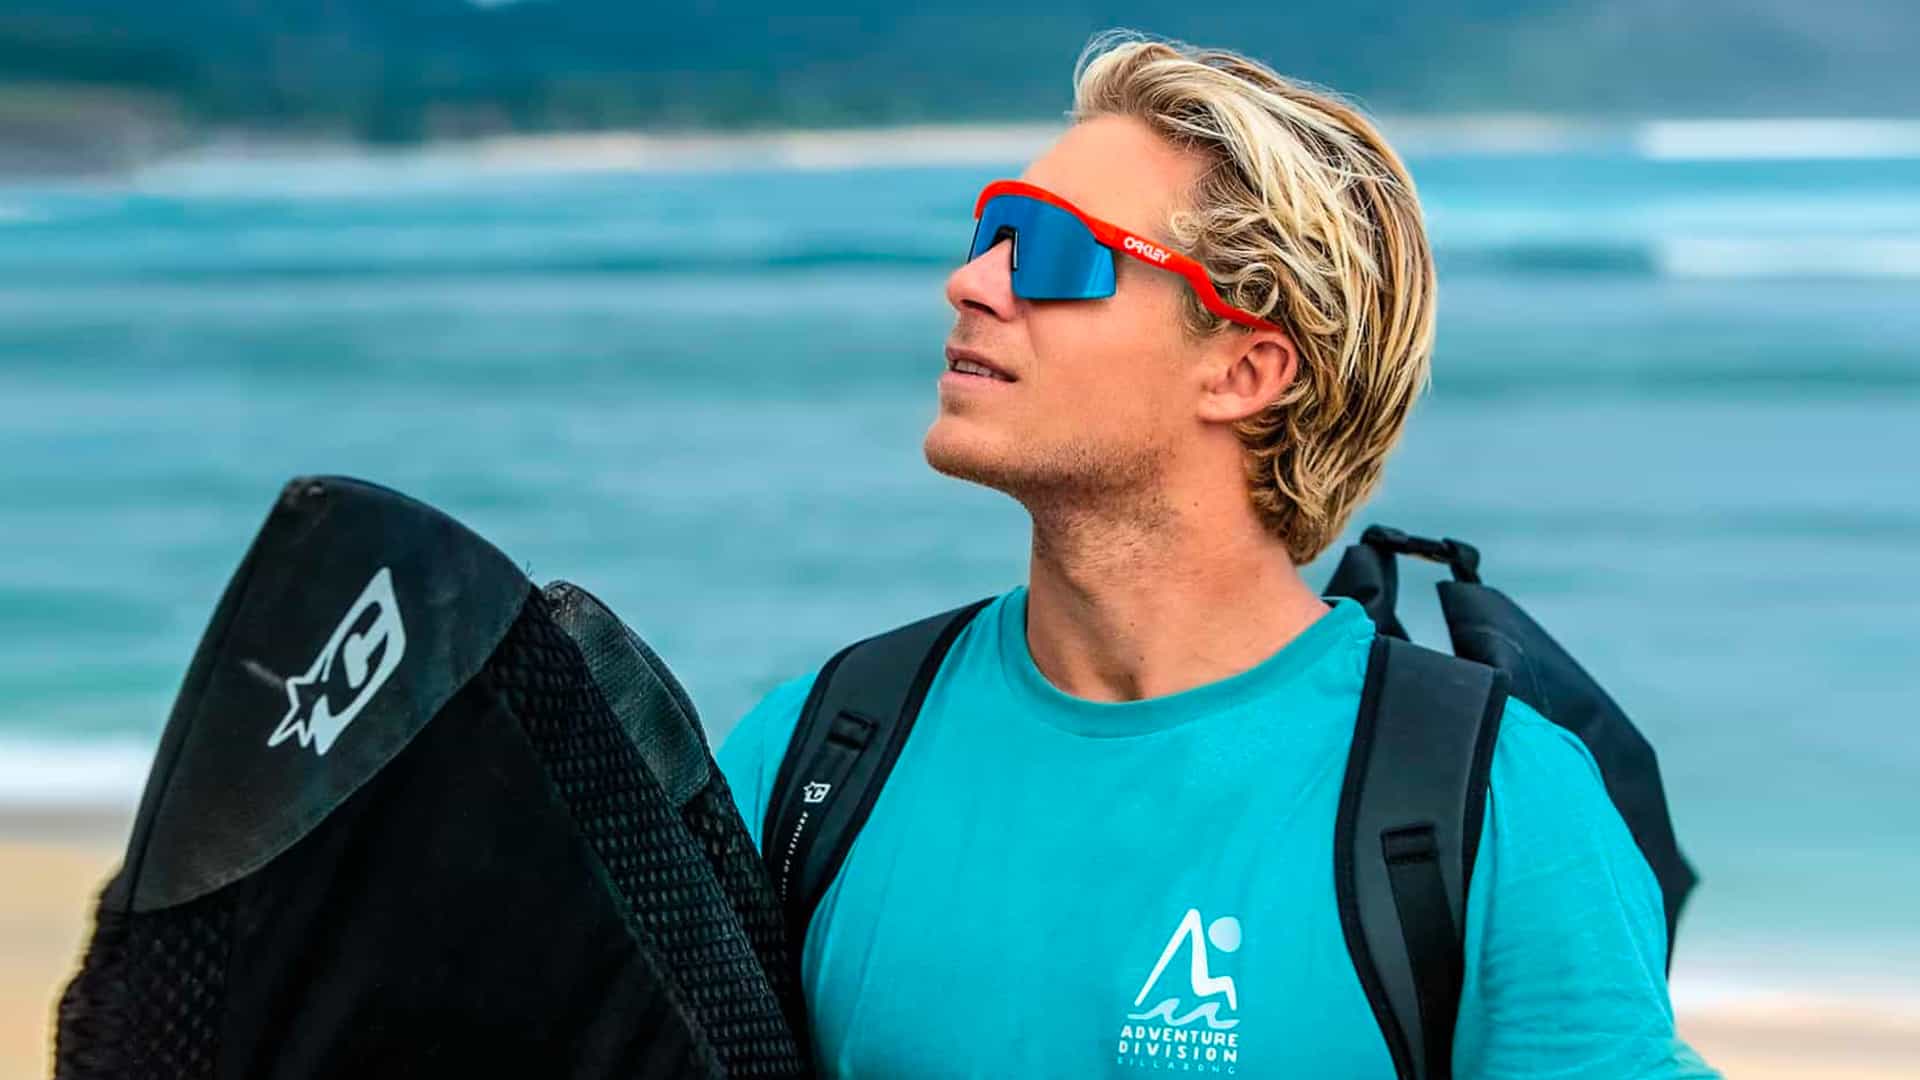 Ride The Wave: The 15 Coolest Surf Fashion Brands For Men